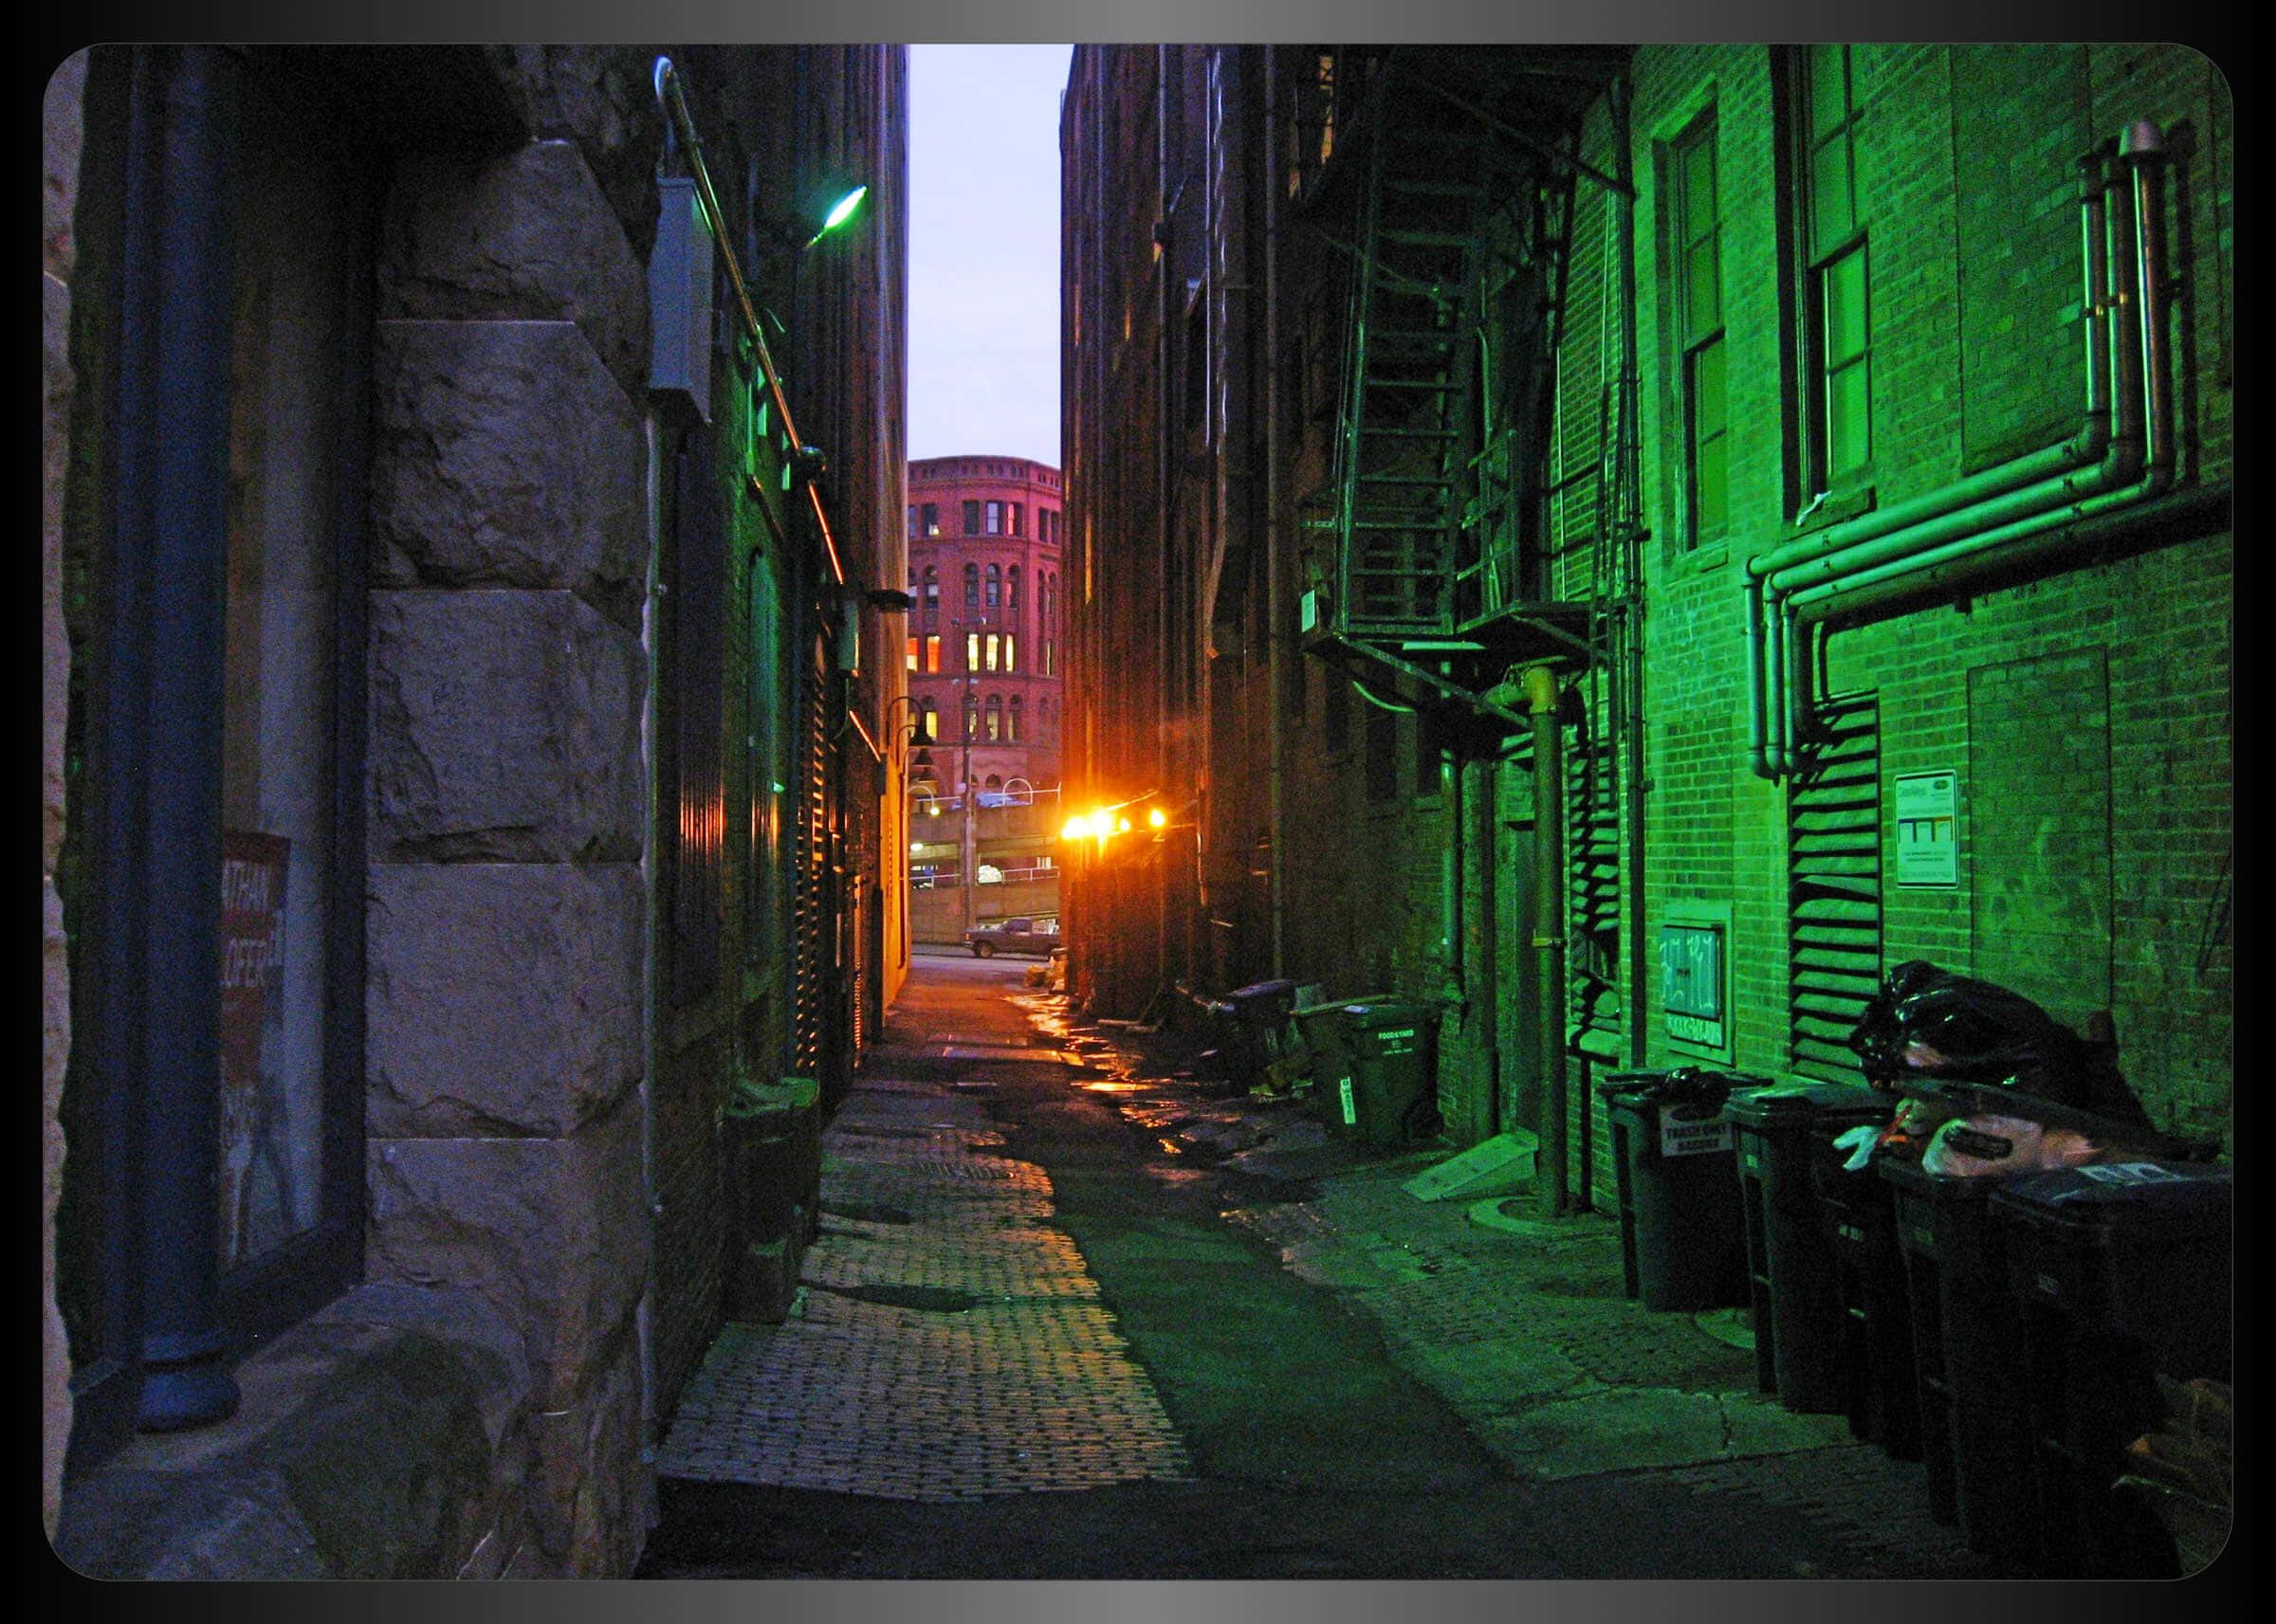 A secluded alleyway perfect for exploring